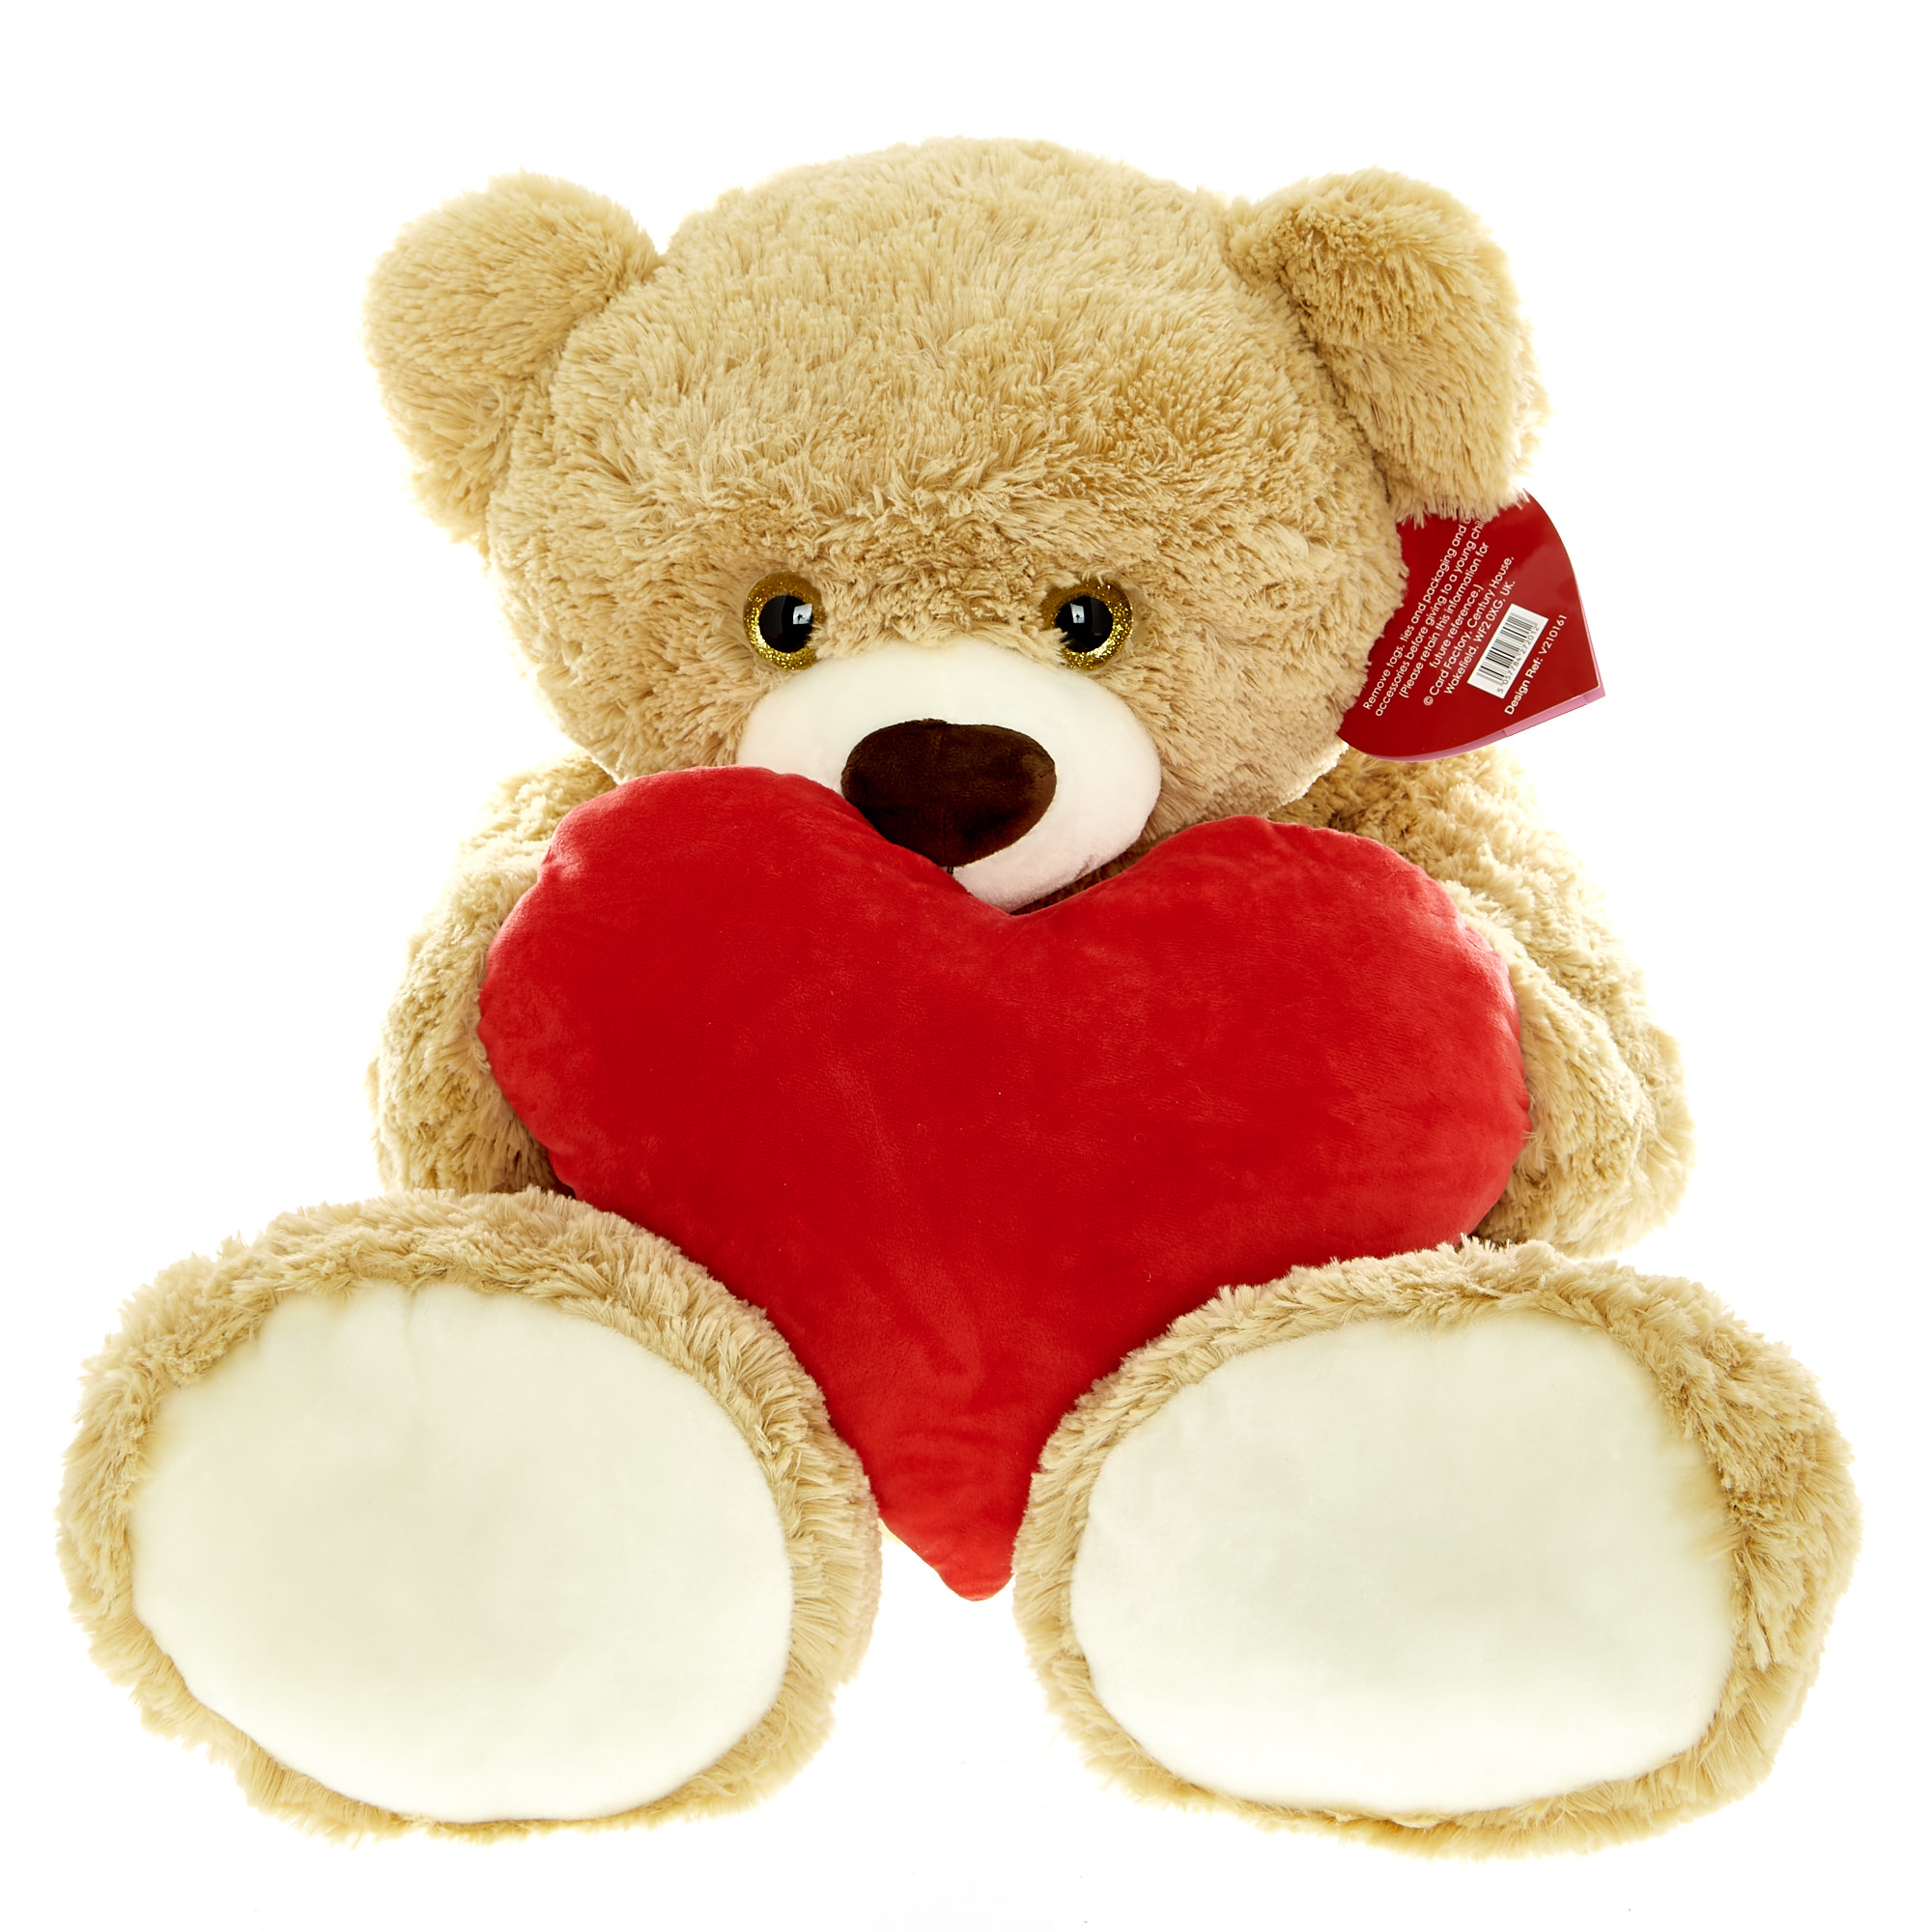 Buy Giant Brown Teddy Bear With Love Heart for GBP 19.99 | Card Factory UK